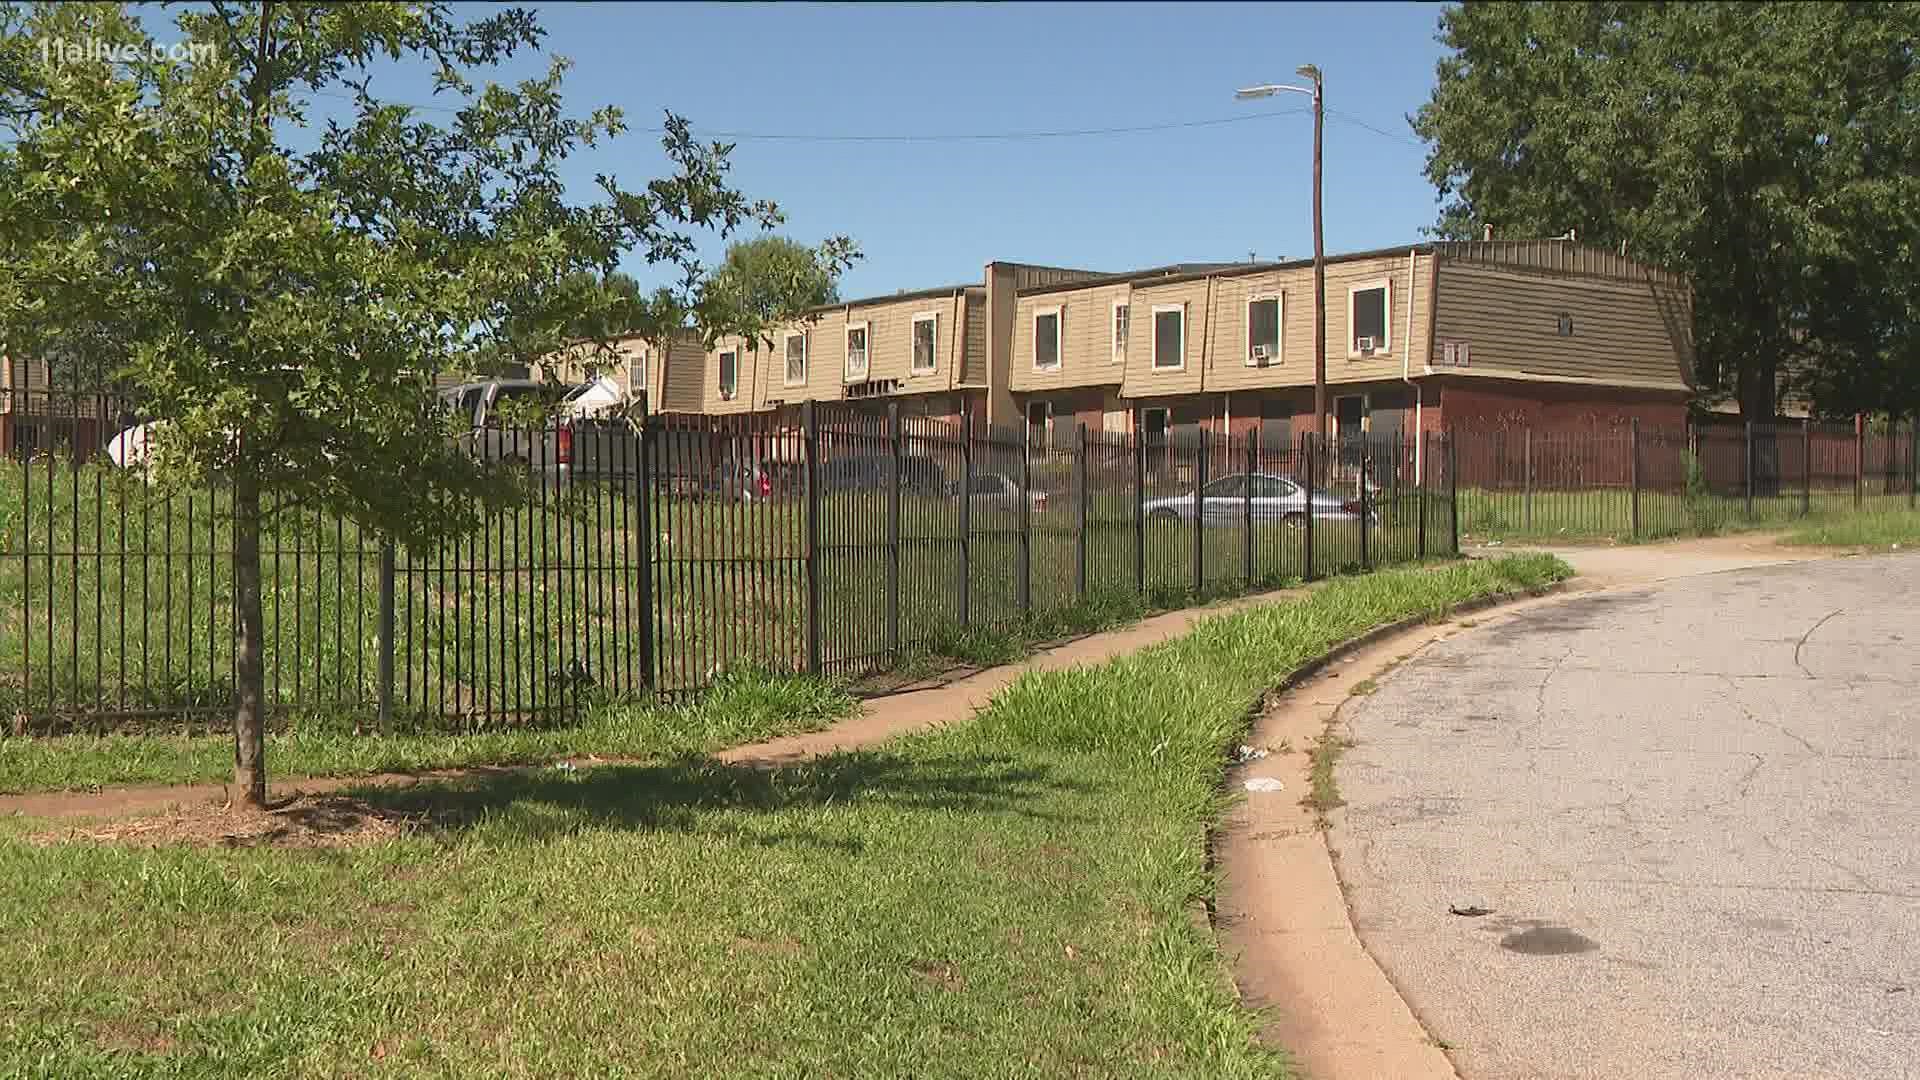 Residents demand timeline for moving out of Atlanta apartment complex 11alive